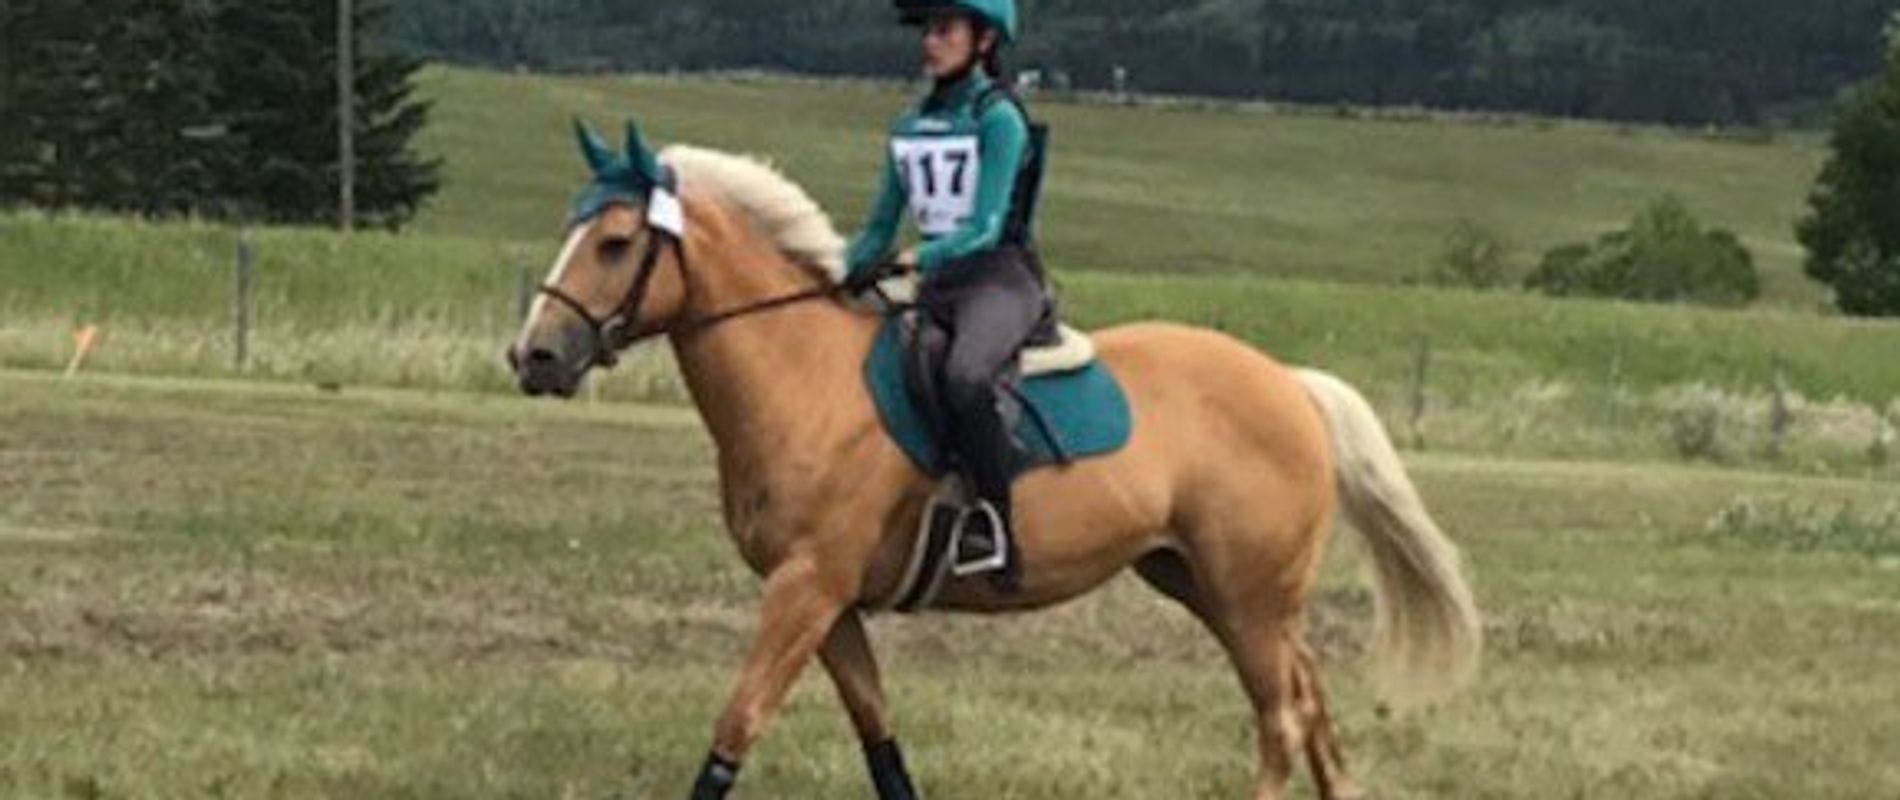 Young rider dressed in green silks riding cross country in a competition on palomino pony